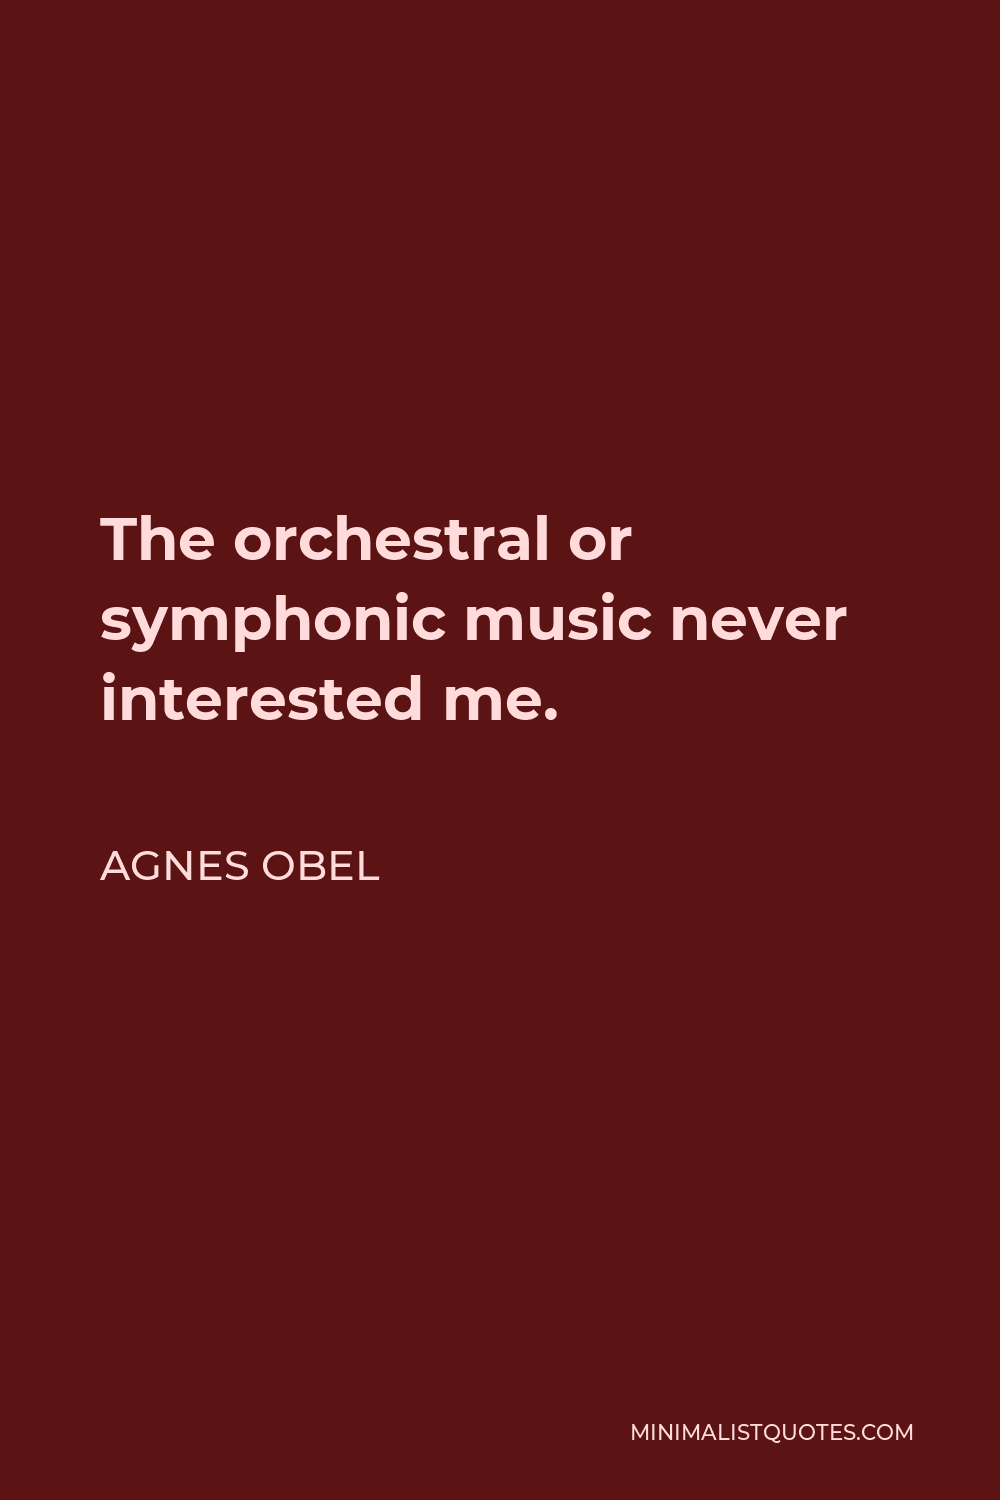 Agnes Obel Quote - The orchestral or symphonic music never interested me.